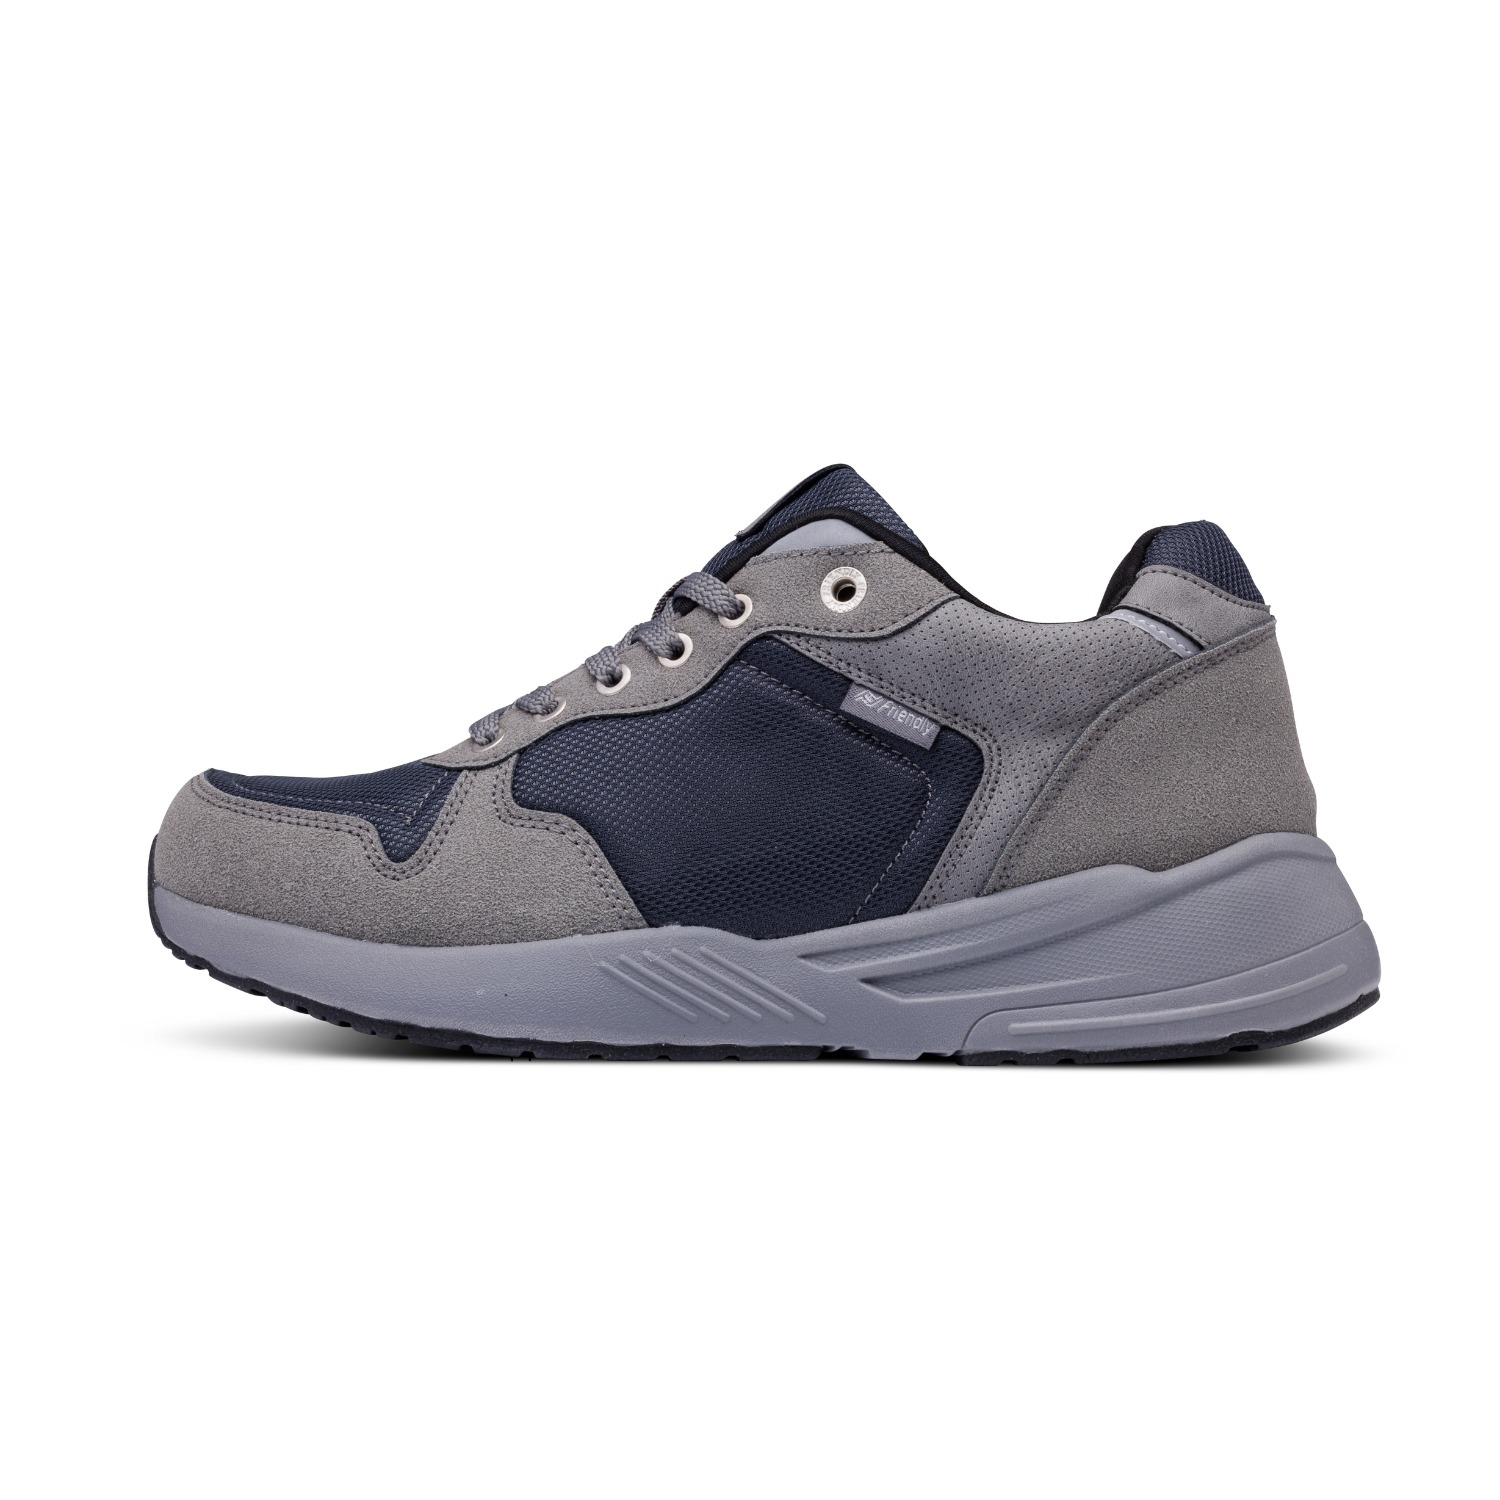 Men's Excursion Grey - Friendly Shoes - The Shoe for All Abilities